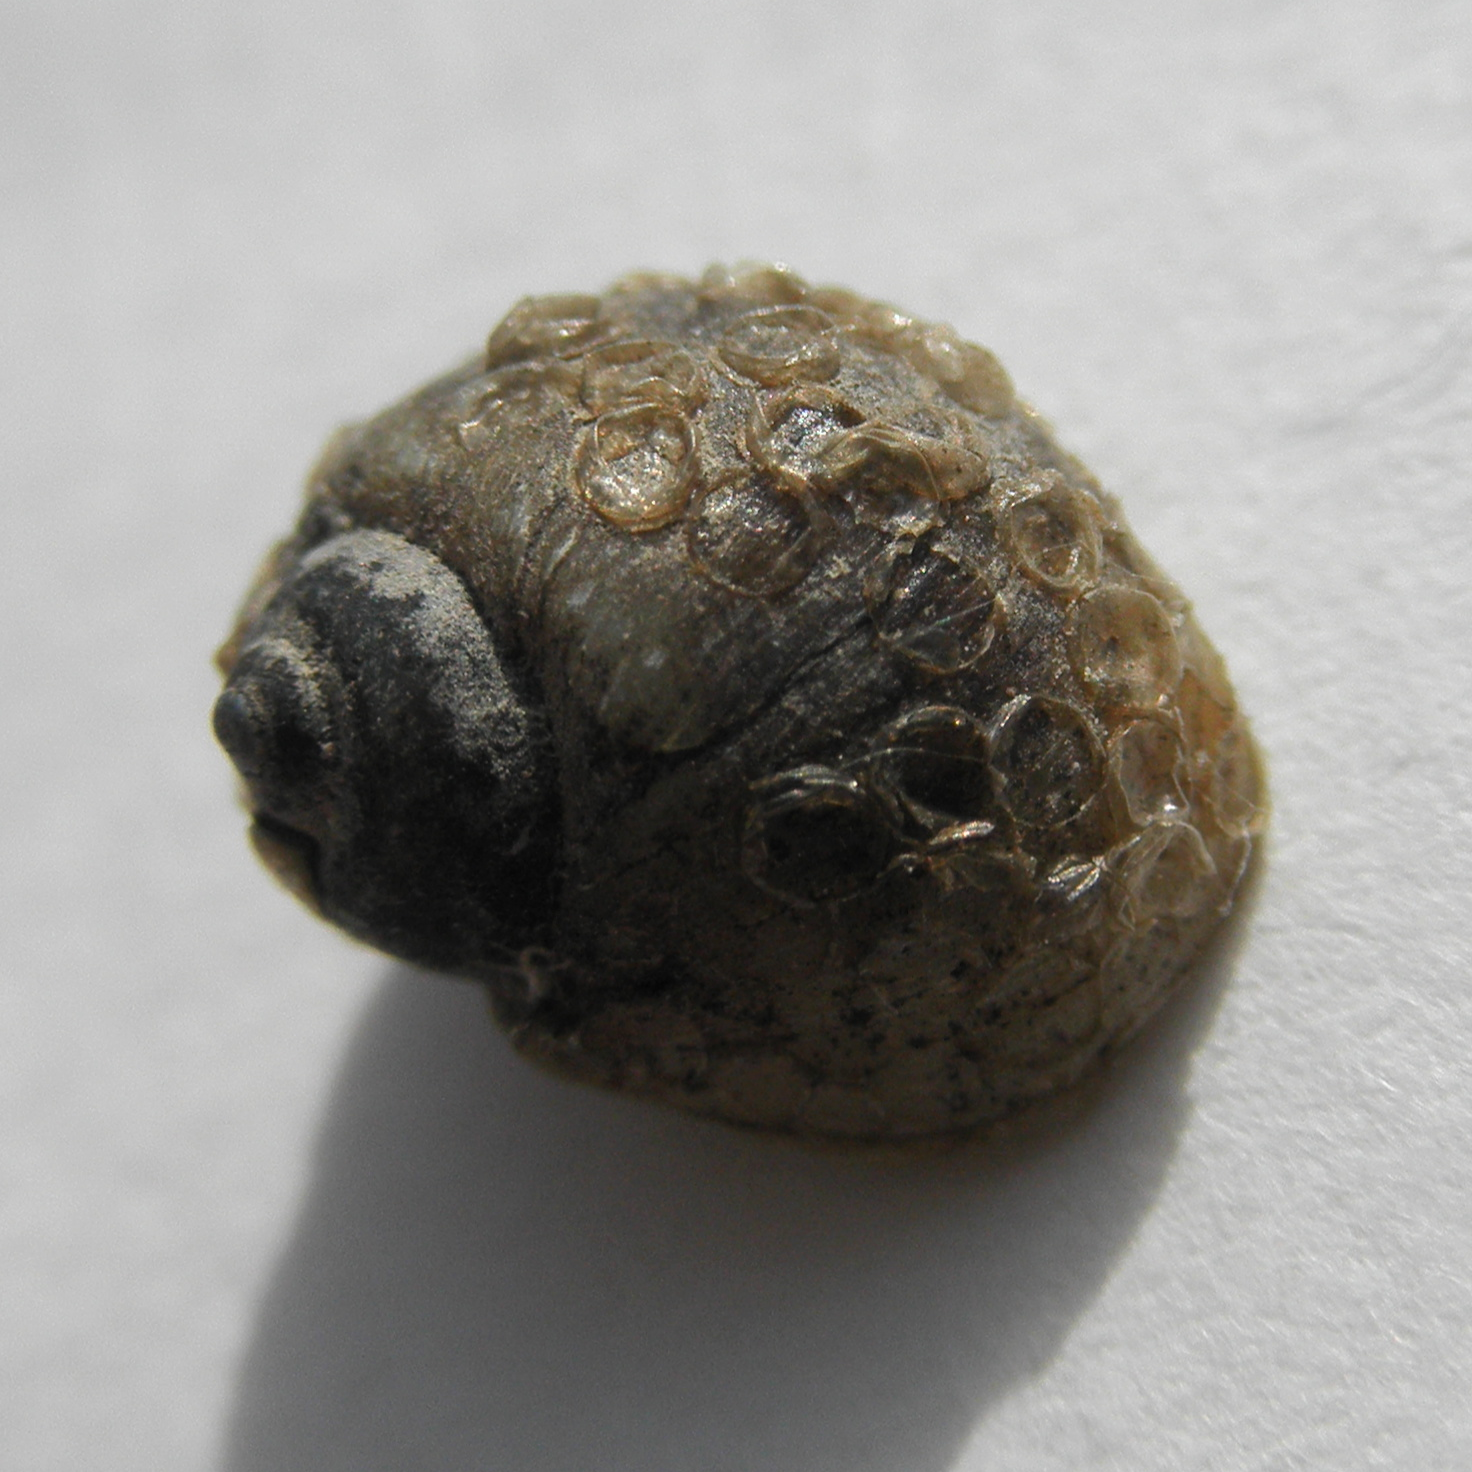 the shell of Lithoglyphus naticoides with egg capsules